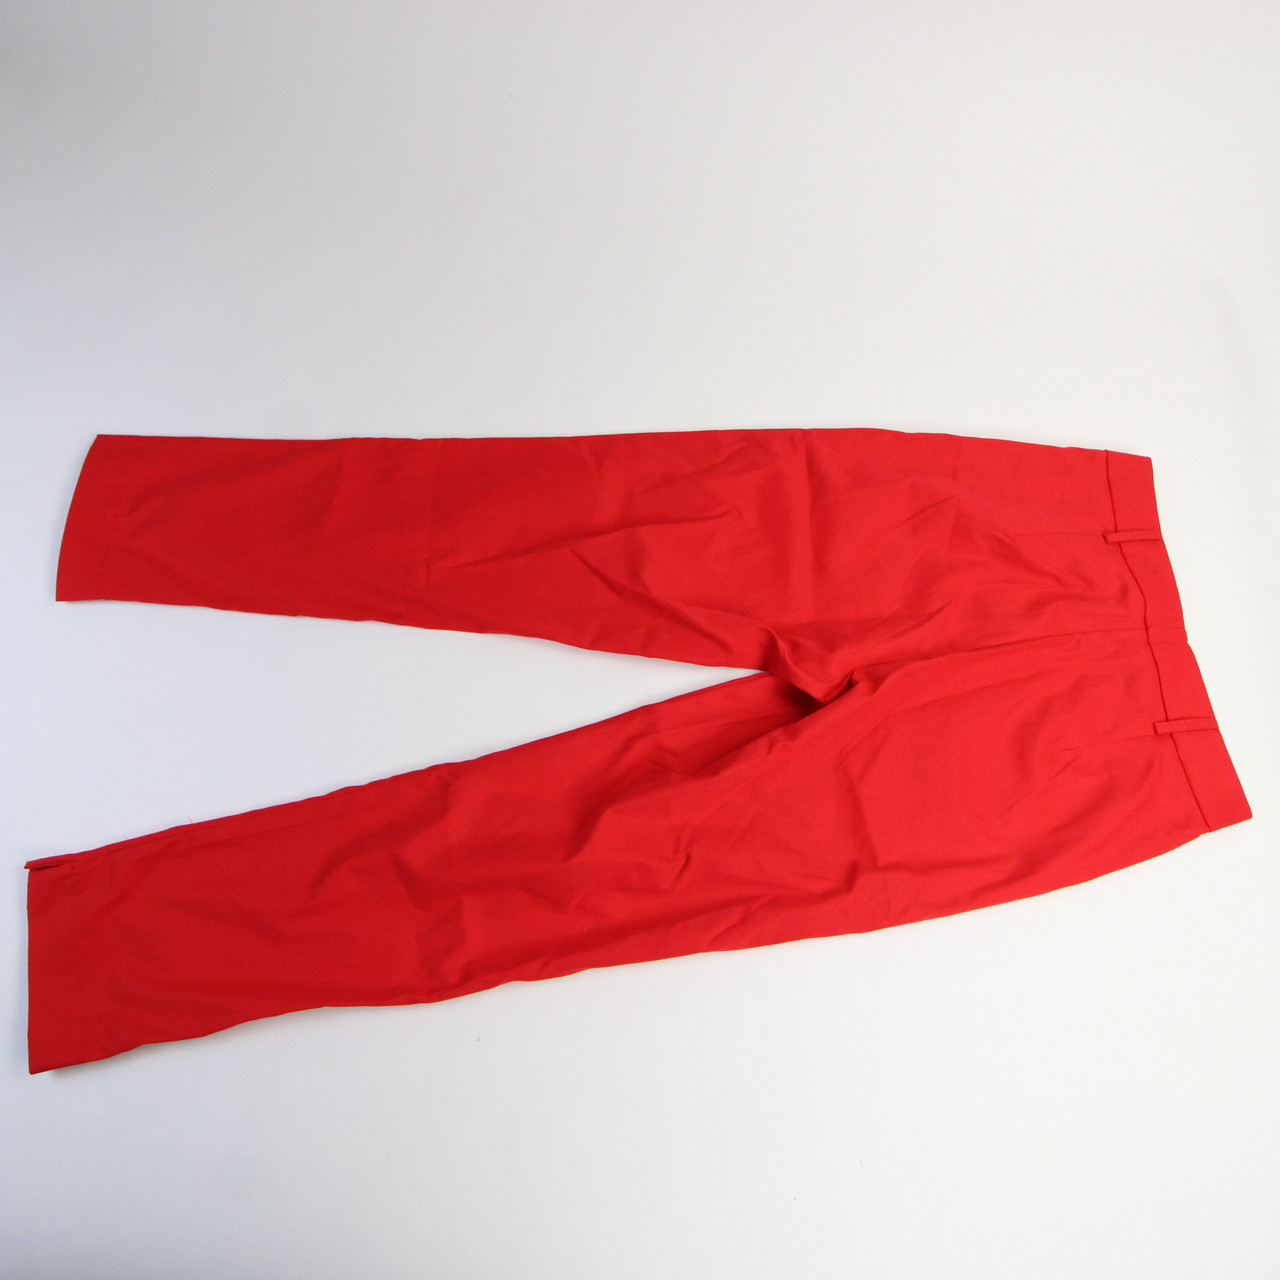 SBetro Dress Pants Women's Red New with Tags S 576